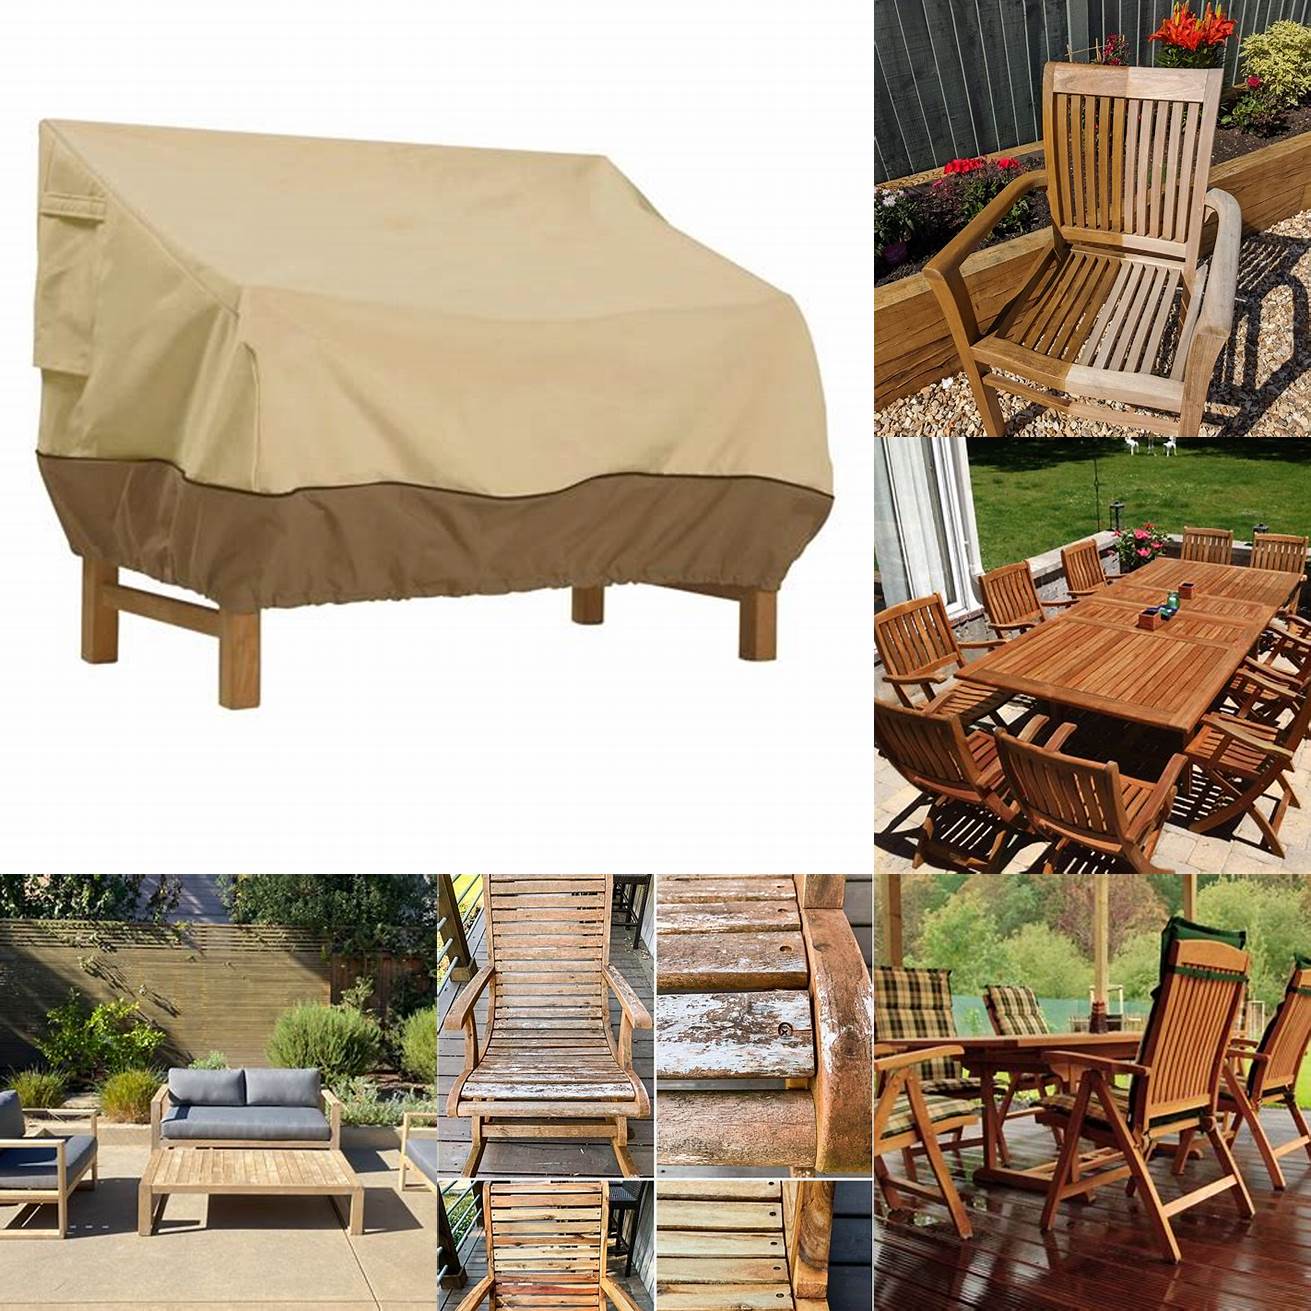 Using furniture covers to protect teak furniture